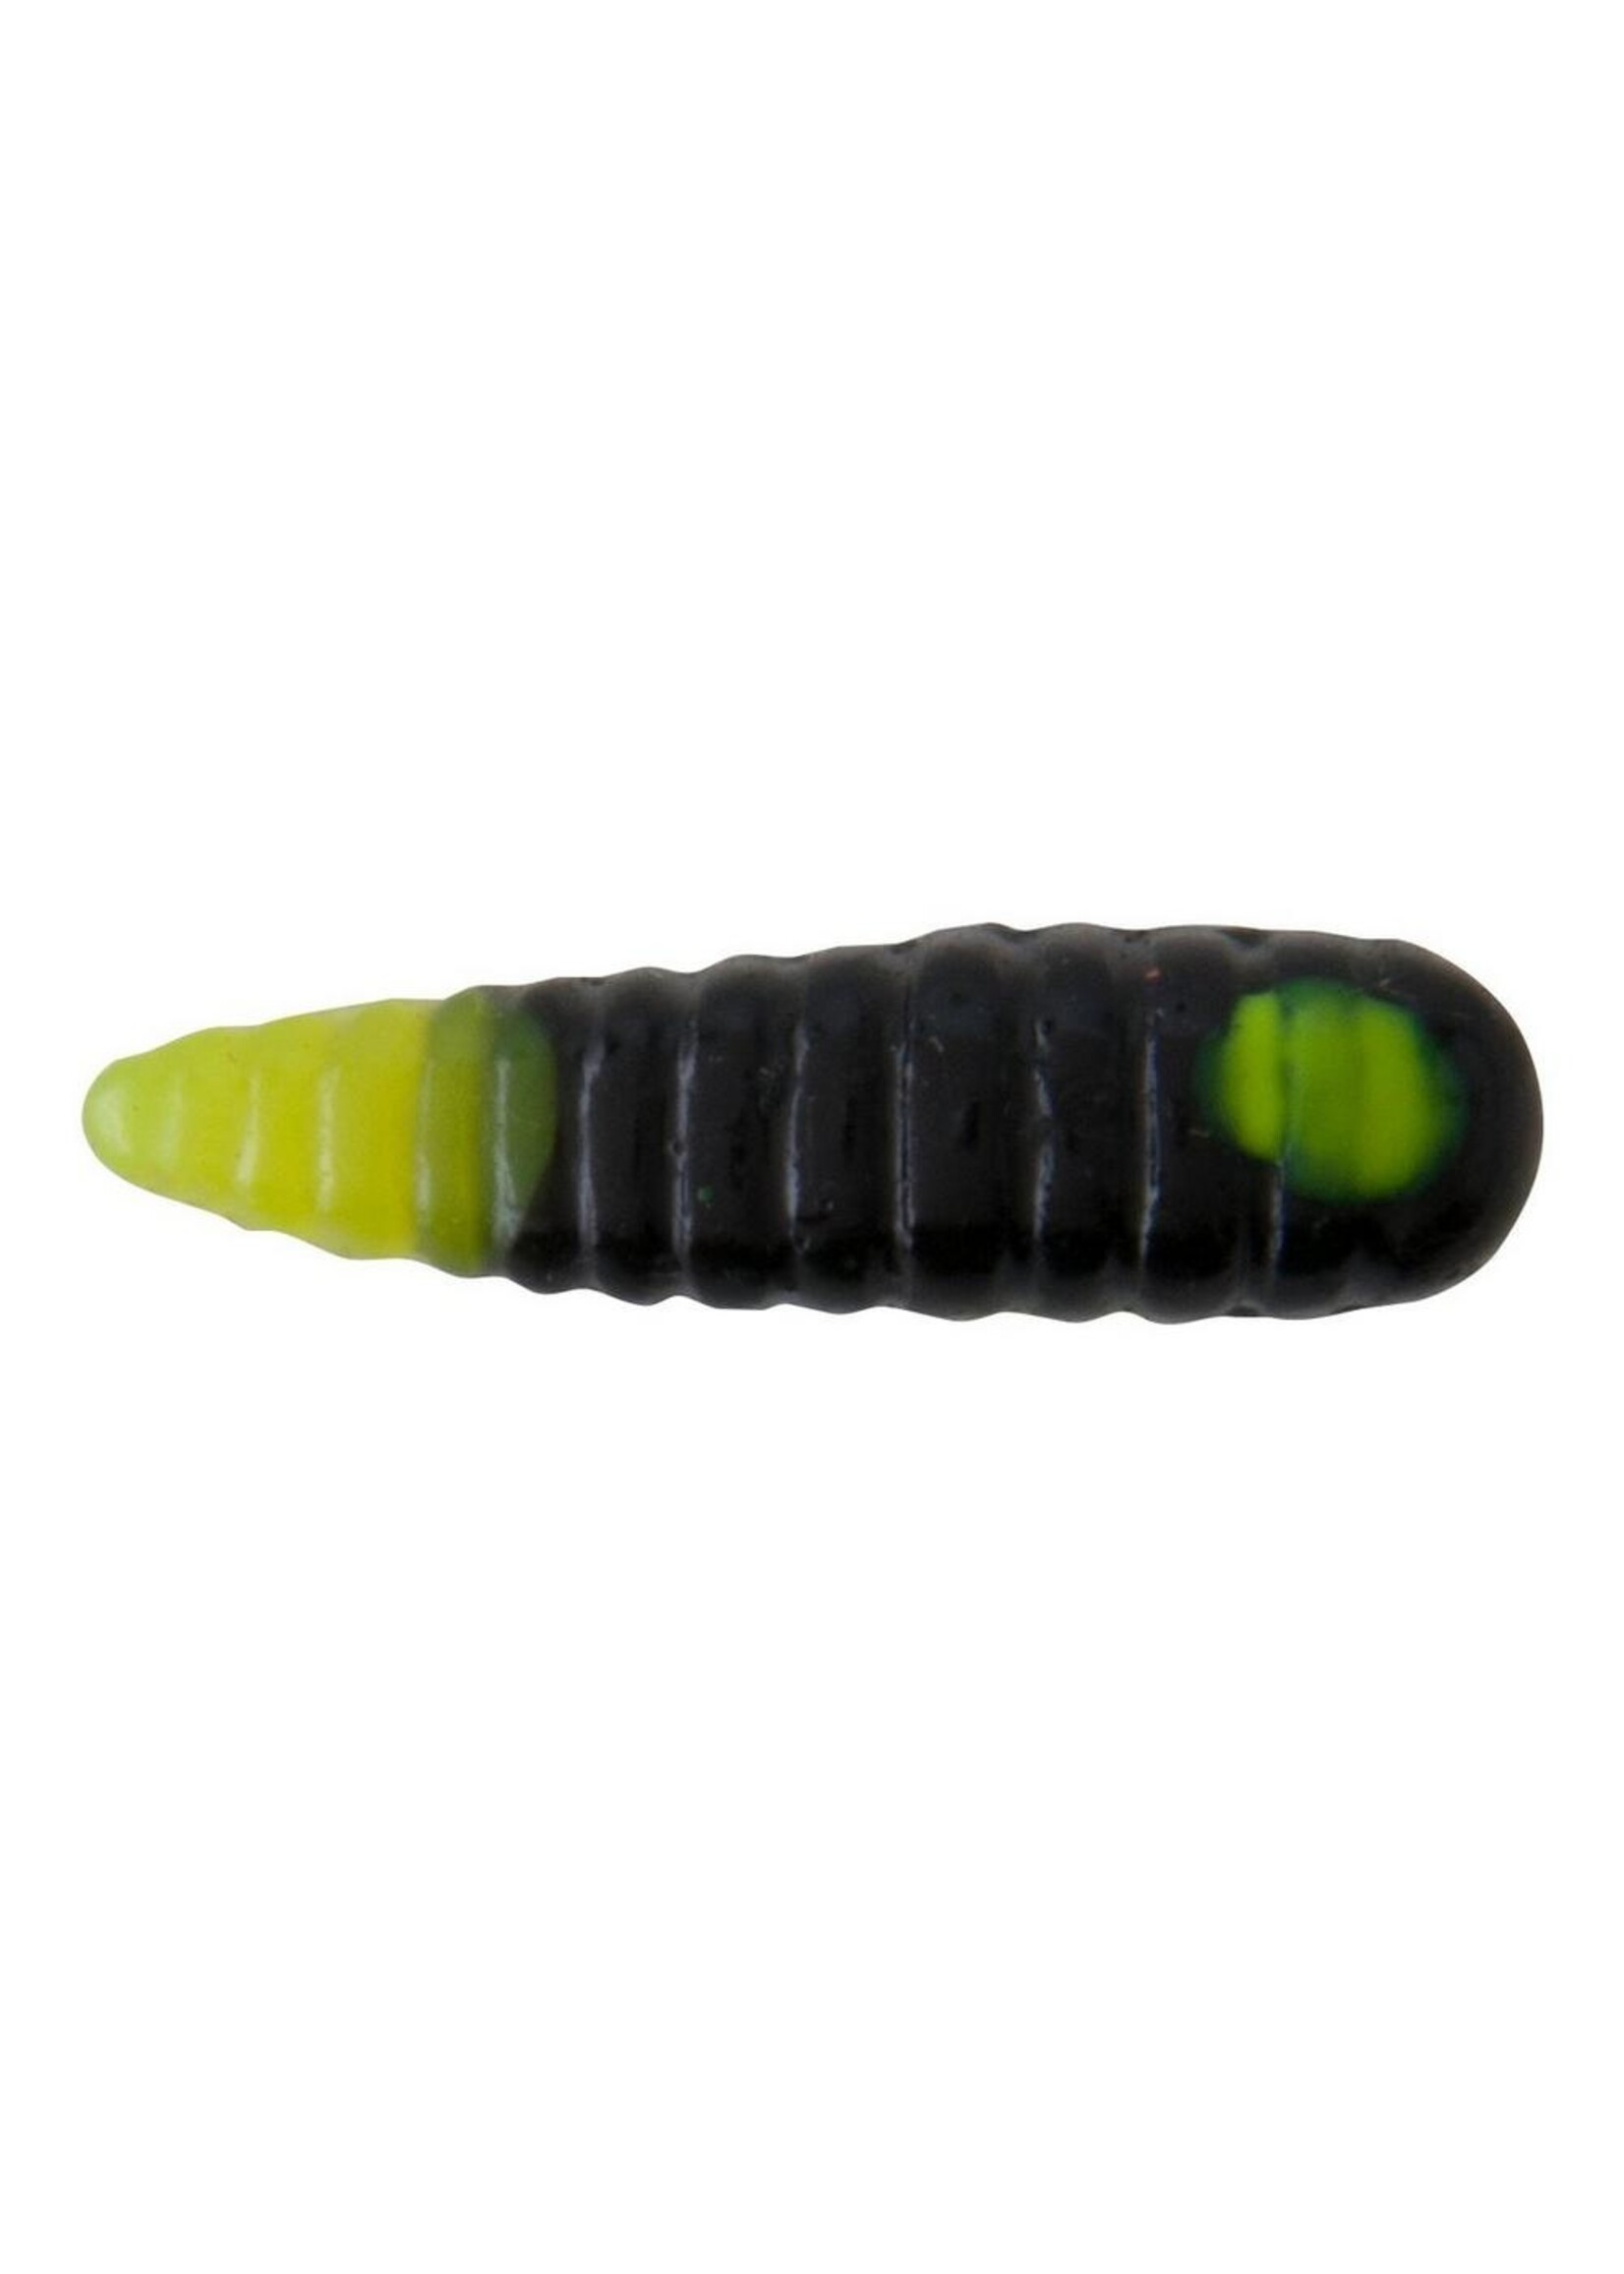 Johnson Beetle Spin Nickel Blade | 1/32 oz Chartreuse Firetail